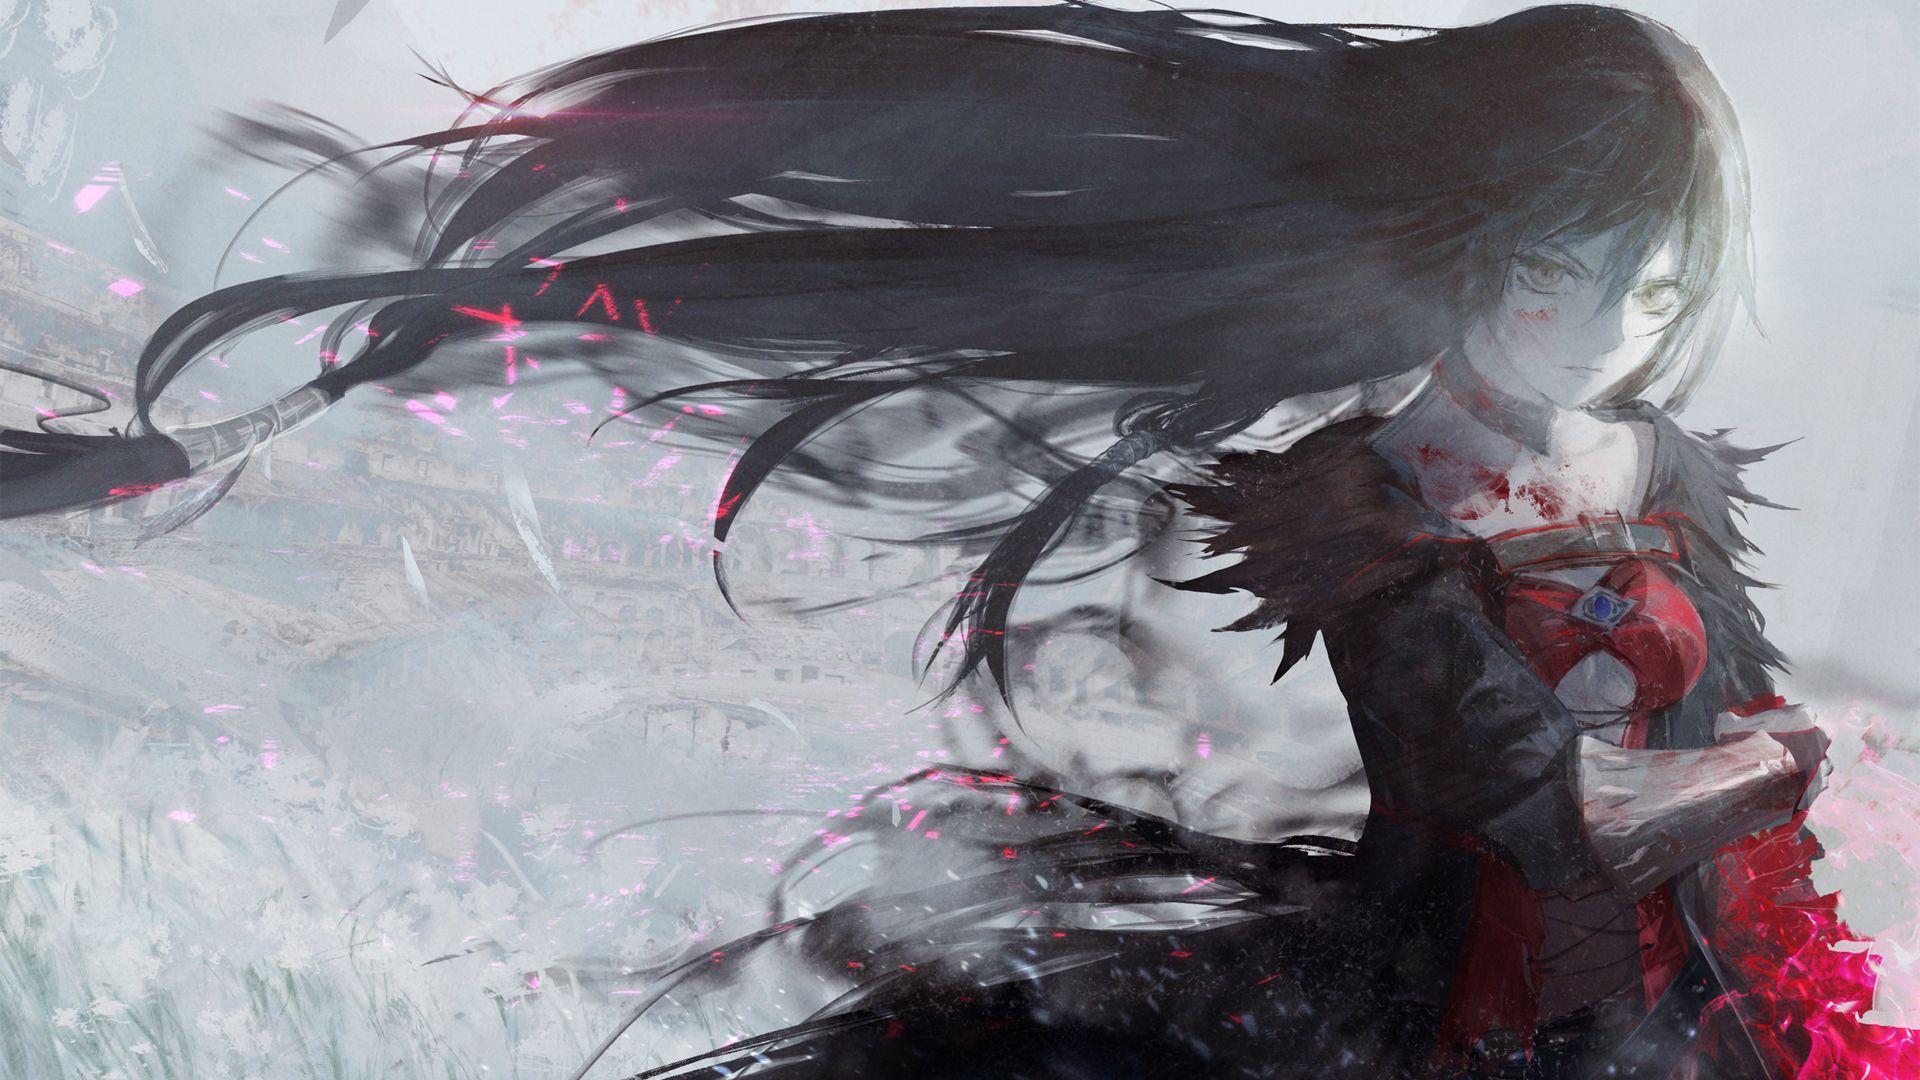 Velvet Crowe with disheveled hair Wallpaper from Tales of Berseria